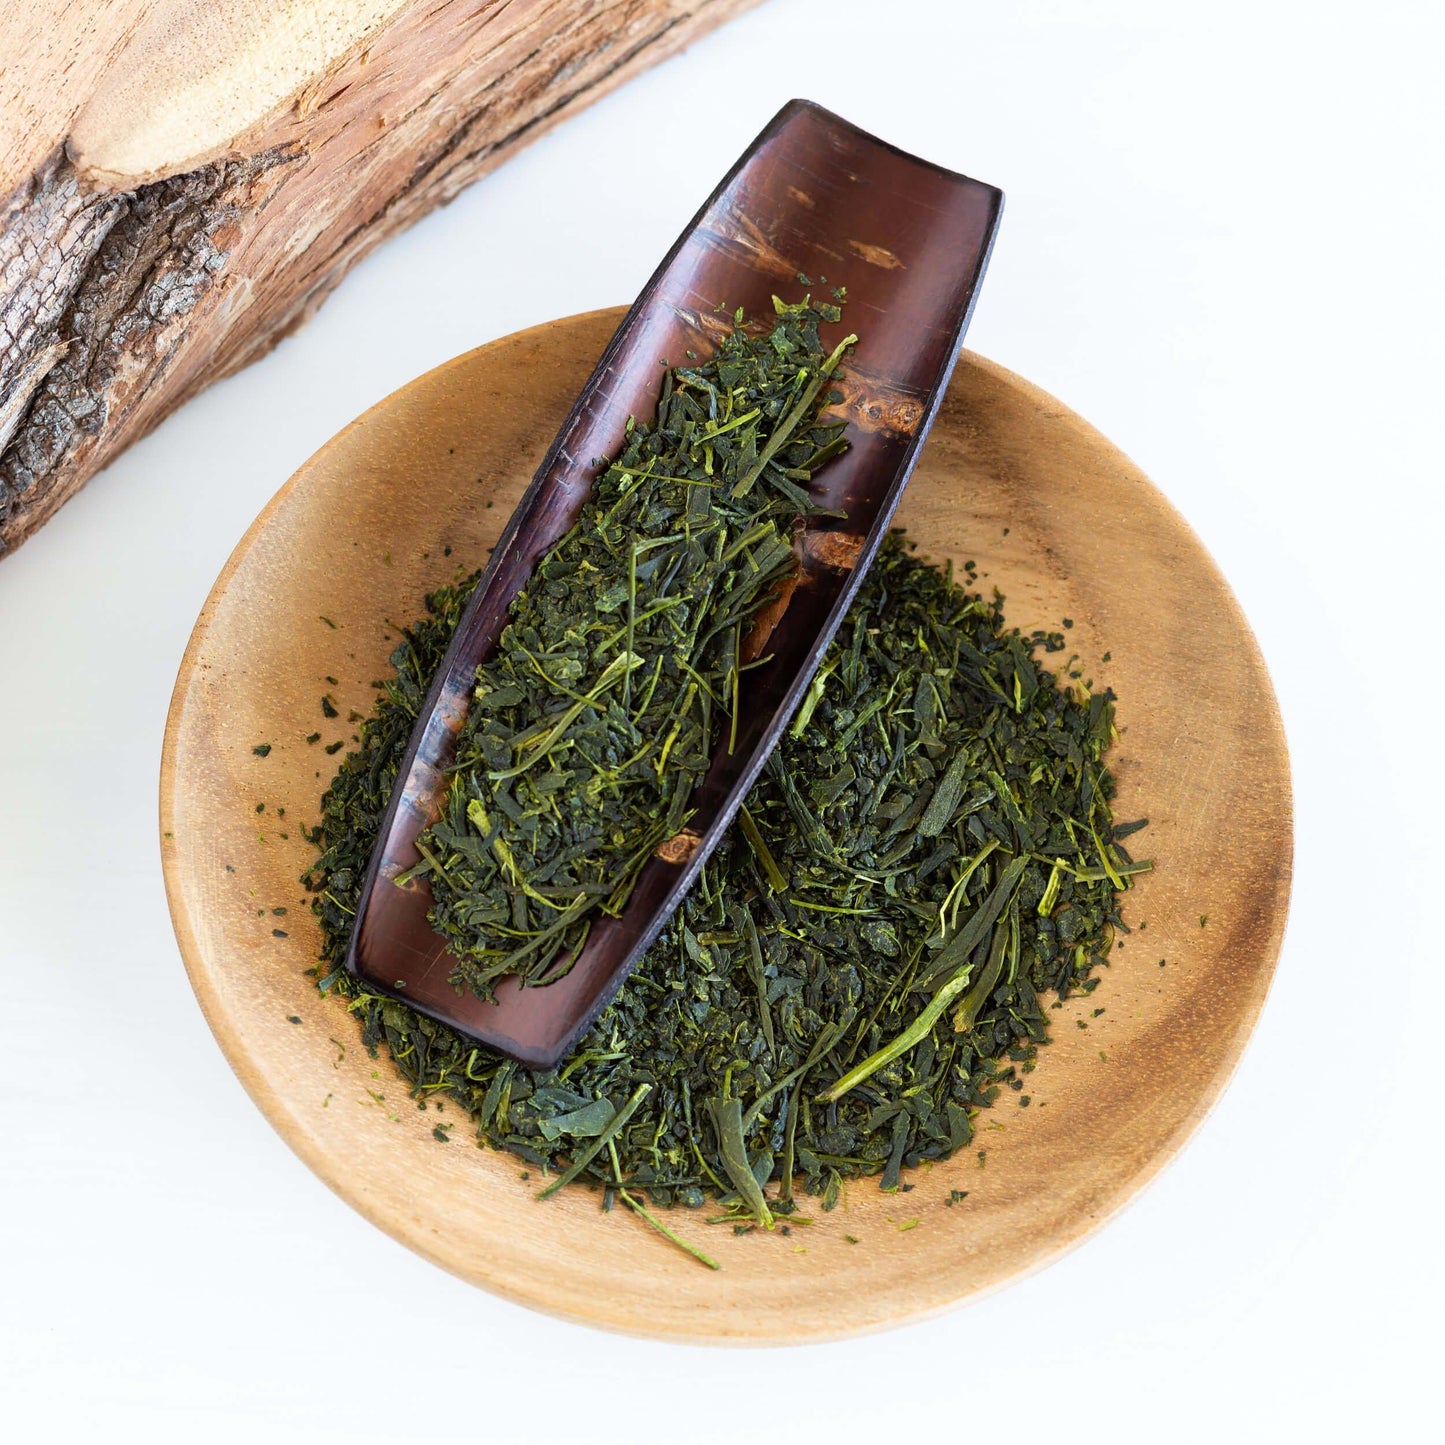 Shincha Green Tea shown from above as loose tea leaves in a Japanese cherry wood scoop and in a small wooden dish.